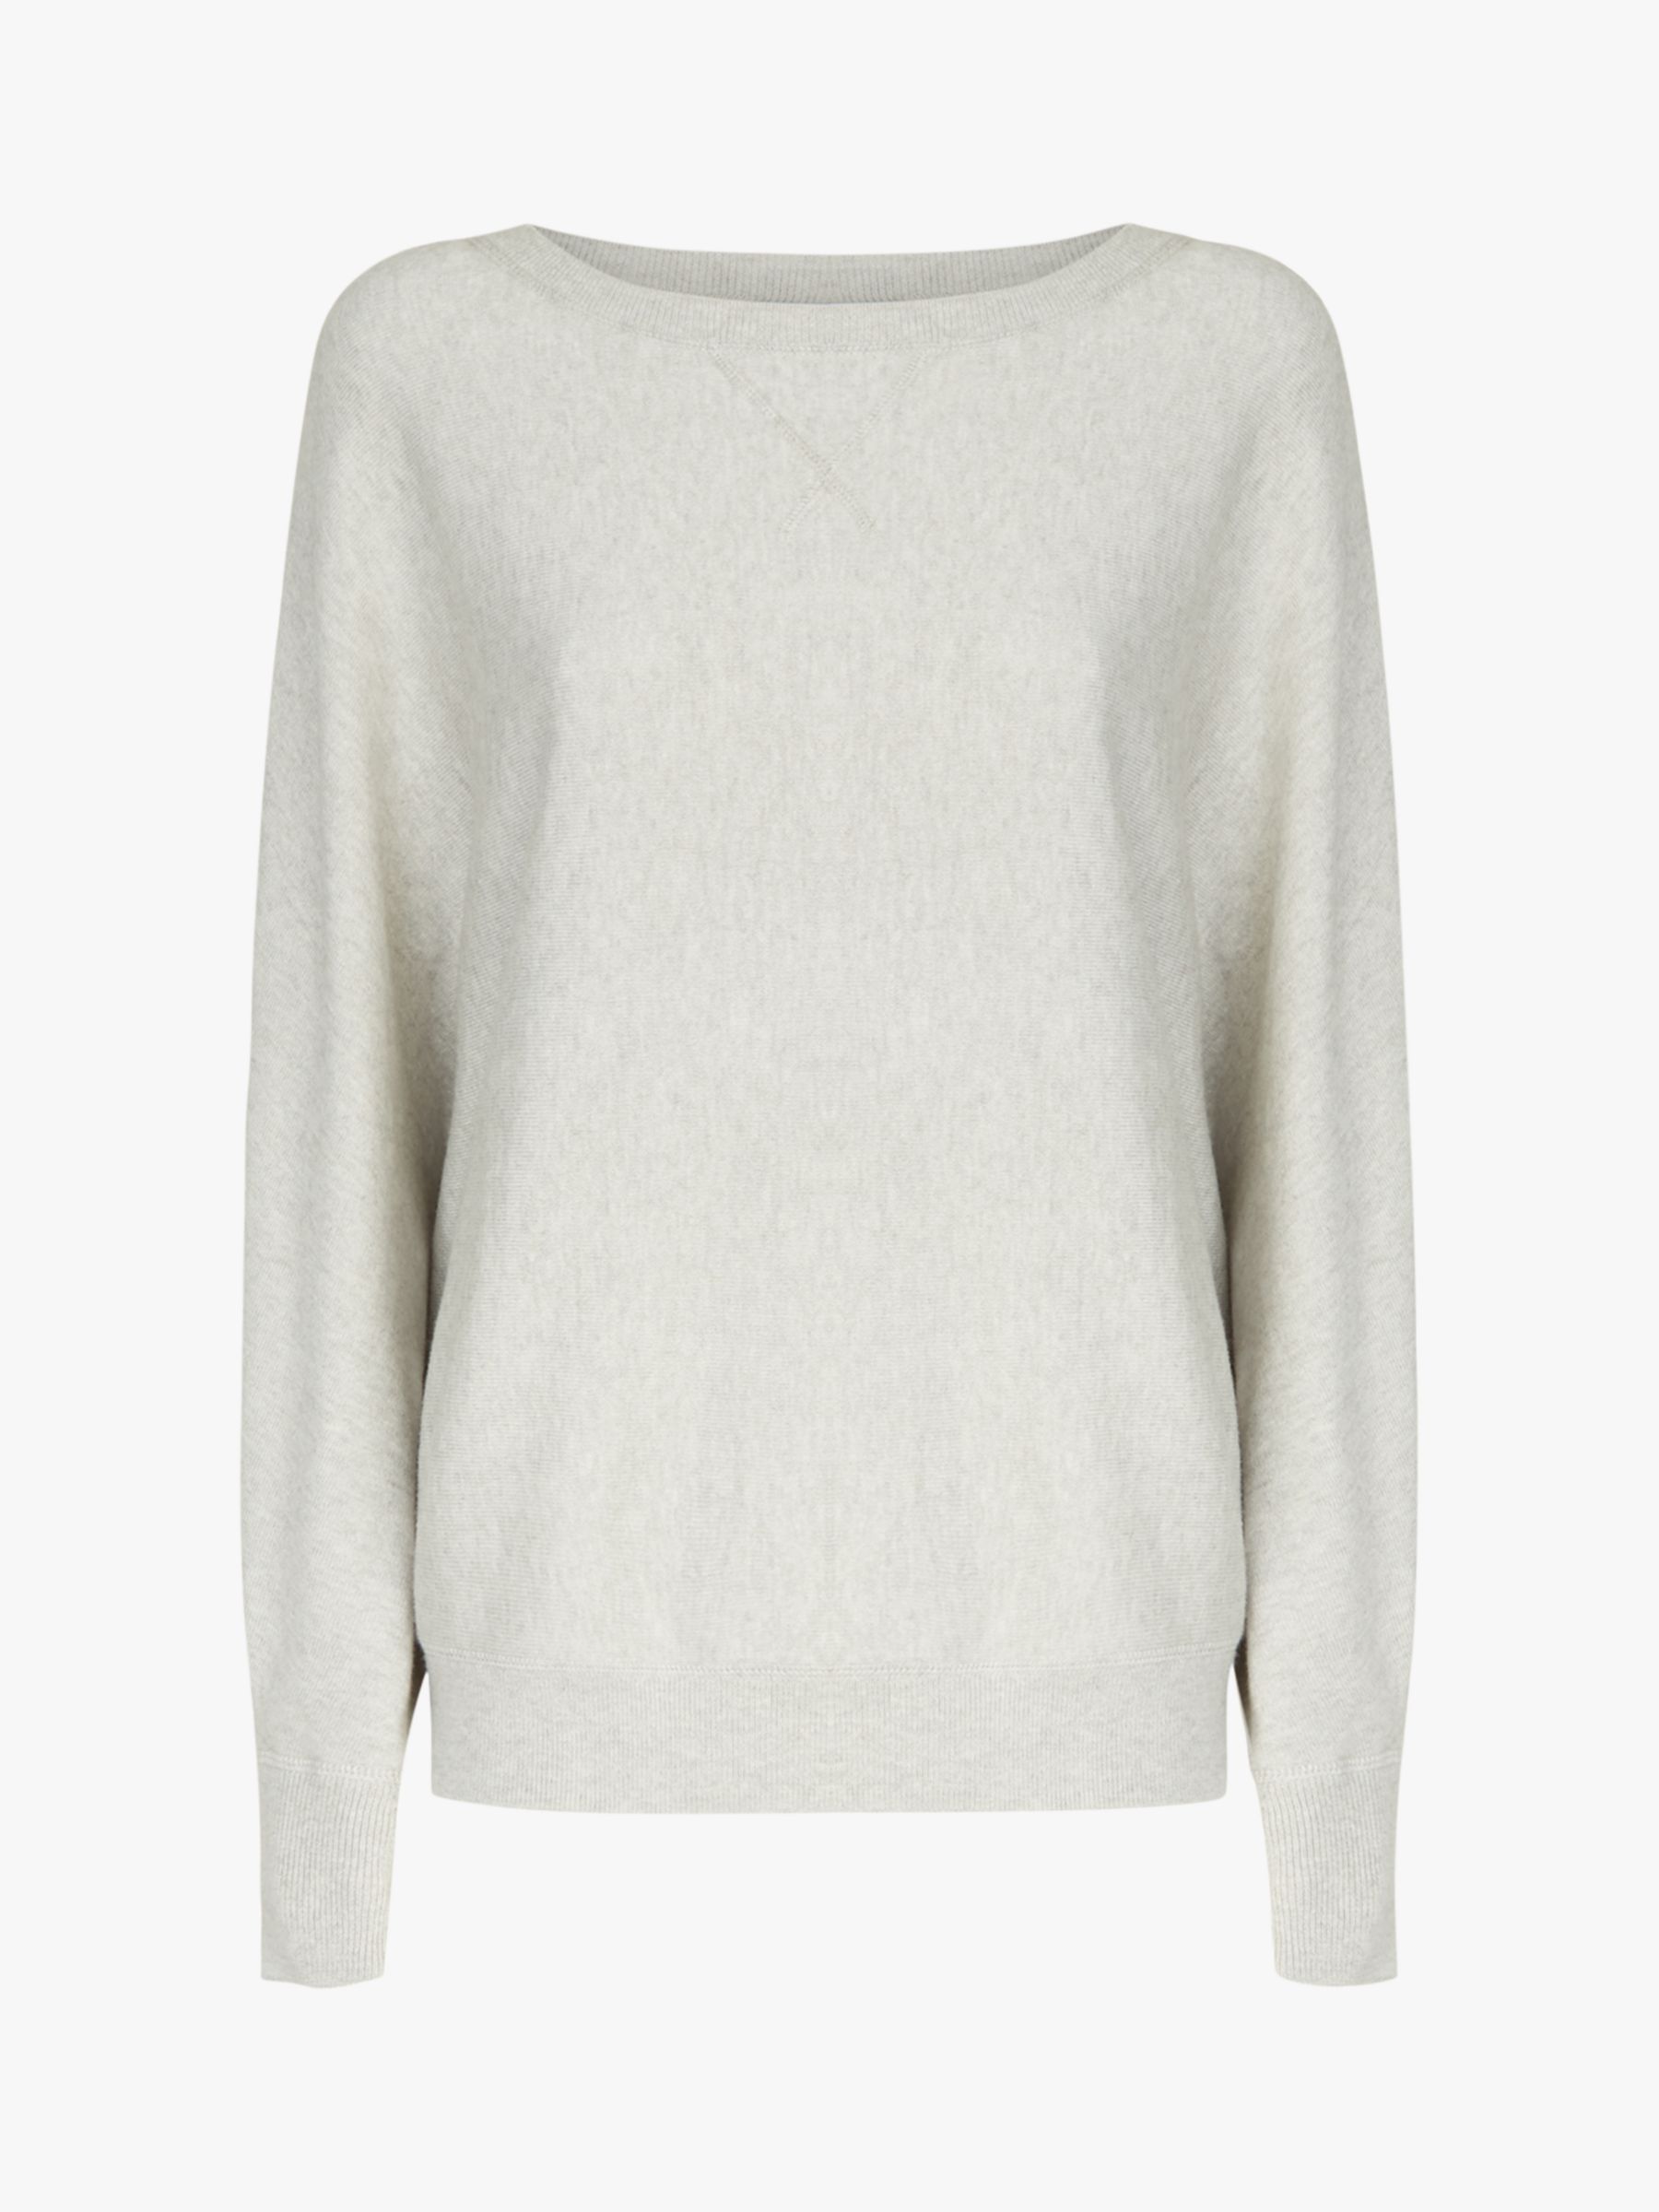 NRBY Sleepy Joe Cotton and Cashmere Blend Sweater, Silver Grey